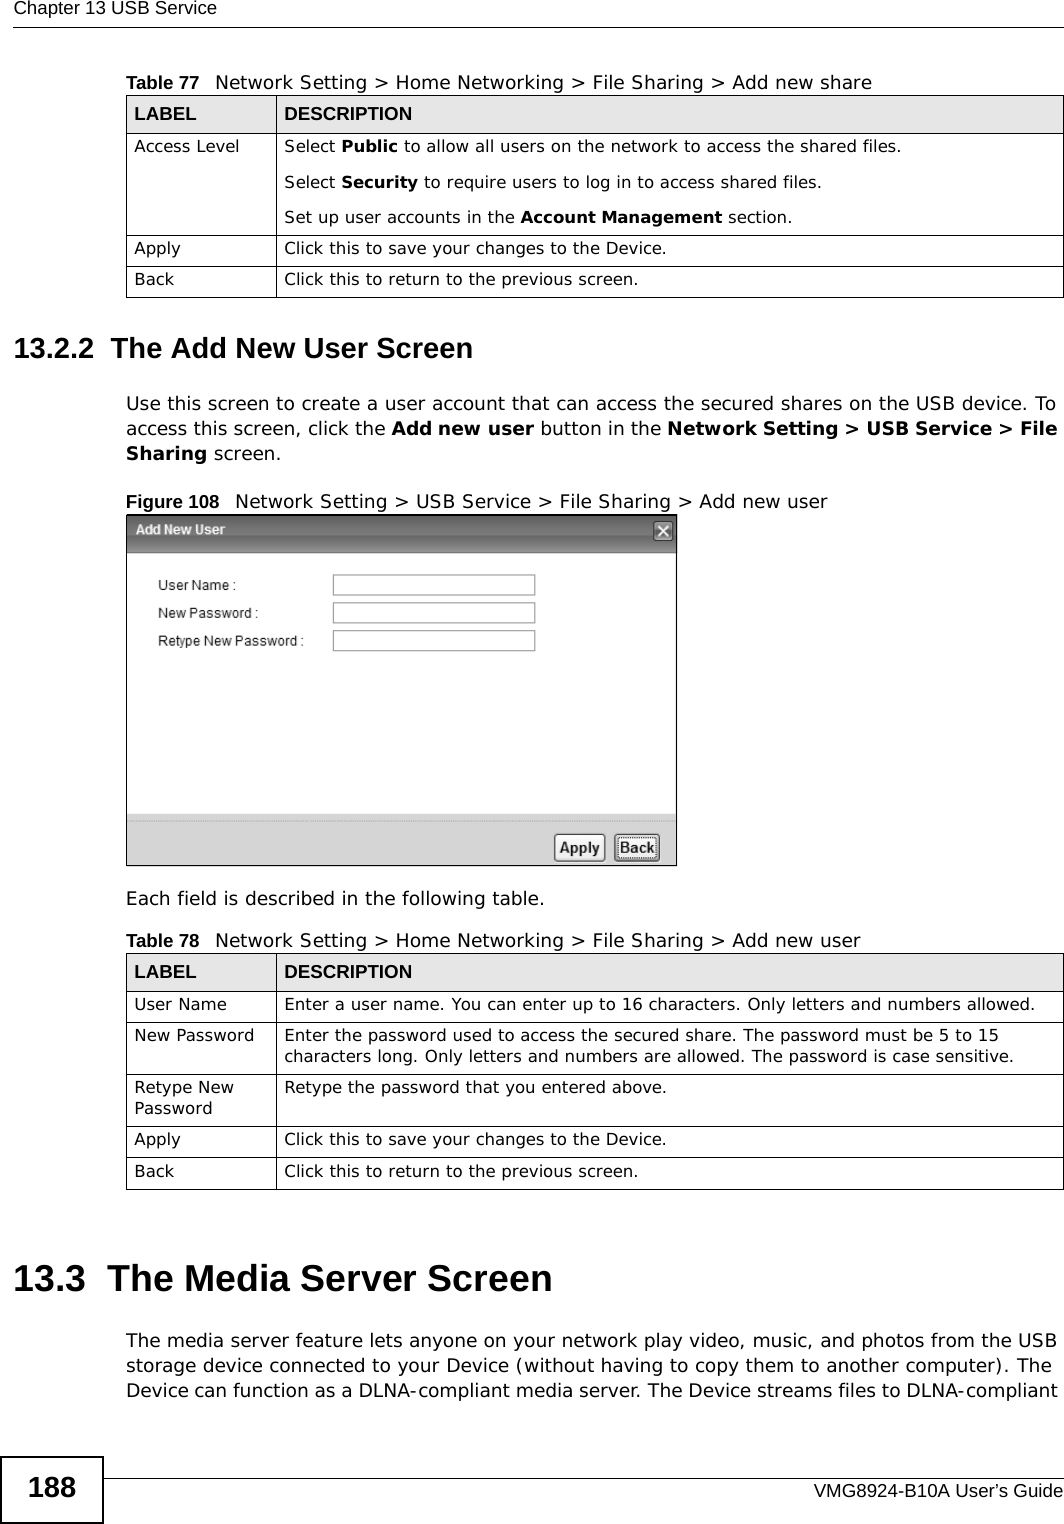 Chapter 13 USB ServiceVMG8924-B10A User’s Guide18813.2.2  The Add New User ScreenUse this screen to create a user account that can access the secured shares on the USB device. To access this screen, click the Add new user button in the Network Setting &gt; USB Service &gt; File Sharing screen.Figure 108   Network Setting &gt; USB Service &gt; File Sharing &gt; Add new userEach field is described in the following table.13.3  The Media Server ScreenThe media server feature lets anyone on your network play video, music, and photos from the USB storage device connected to your Device (without having to copy them to another computer). The Device can function as a DLNA-compliant media server. The Device streams files to DLNA-compliant Access Level Select Public to allow all users on the network to access the shared files.Select Security to require users to log in to access shared files.Set up user accounts in the Account Management section.Apply Click this to save your changes to the Device.Back Click this to return to the previous screen.Table 77   Network Setting &gt; Home Networking &gt; File Sharing &gt; Add new shareLABEL DESCRIPTIONTable 78   Network Setting &gt; Home Networking &gt; File Sharing &gt; Add new userLABEL DESCRIPTIONUser Name Enter a user name. You can enter up to 16 characters. Only letters and numbers allowed.New Password Enter the password used to access the secured share. The password must be 5 to 15 characters long. Only letters and numbers are allowed. The password is case sensitive.Retype New Password Retype the password that you entered above.Apply Click this to save your changes to the Device.Back Click this to return to the previous screen.